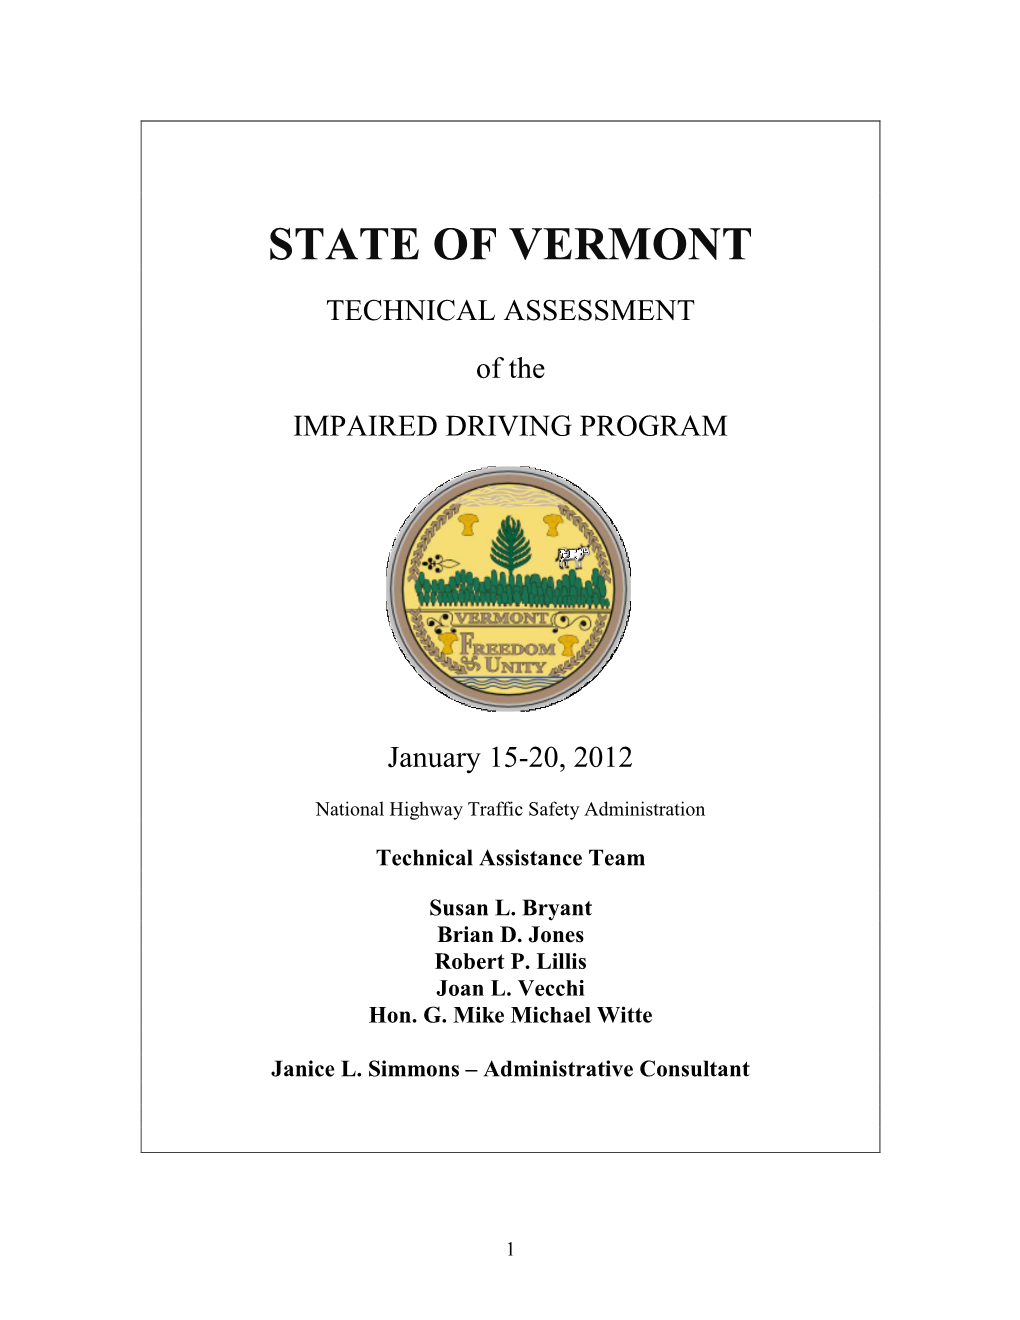 STATE of VERMONT TECHNICAL ASSESSMENT of the IMPAIRED DRIVING PROGRAM